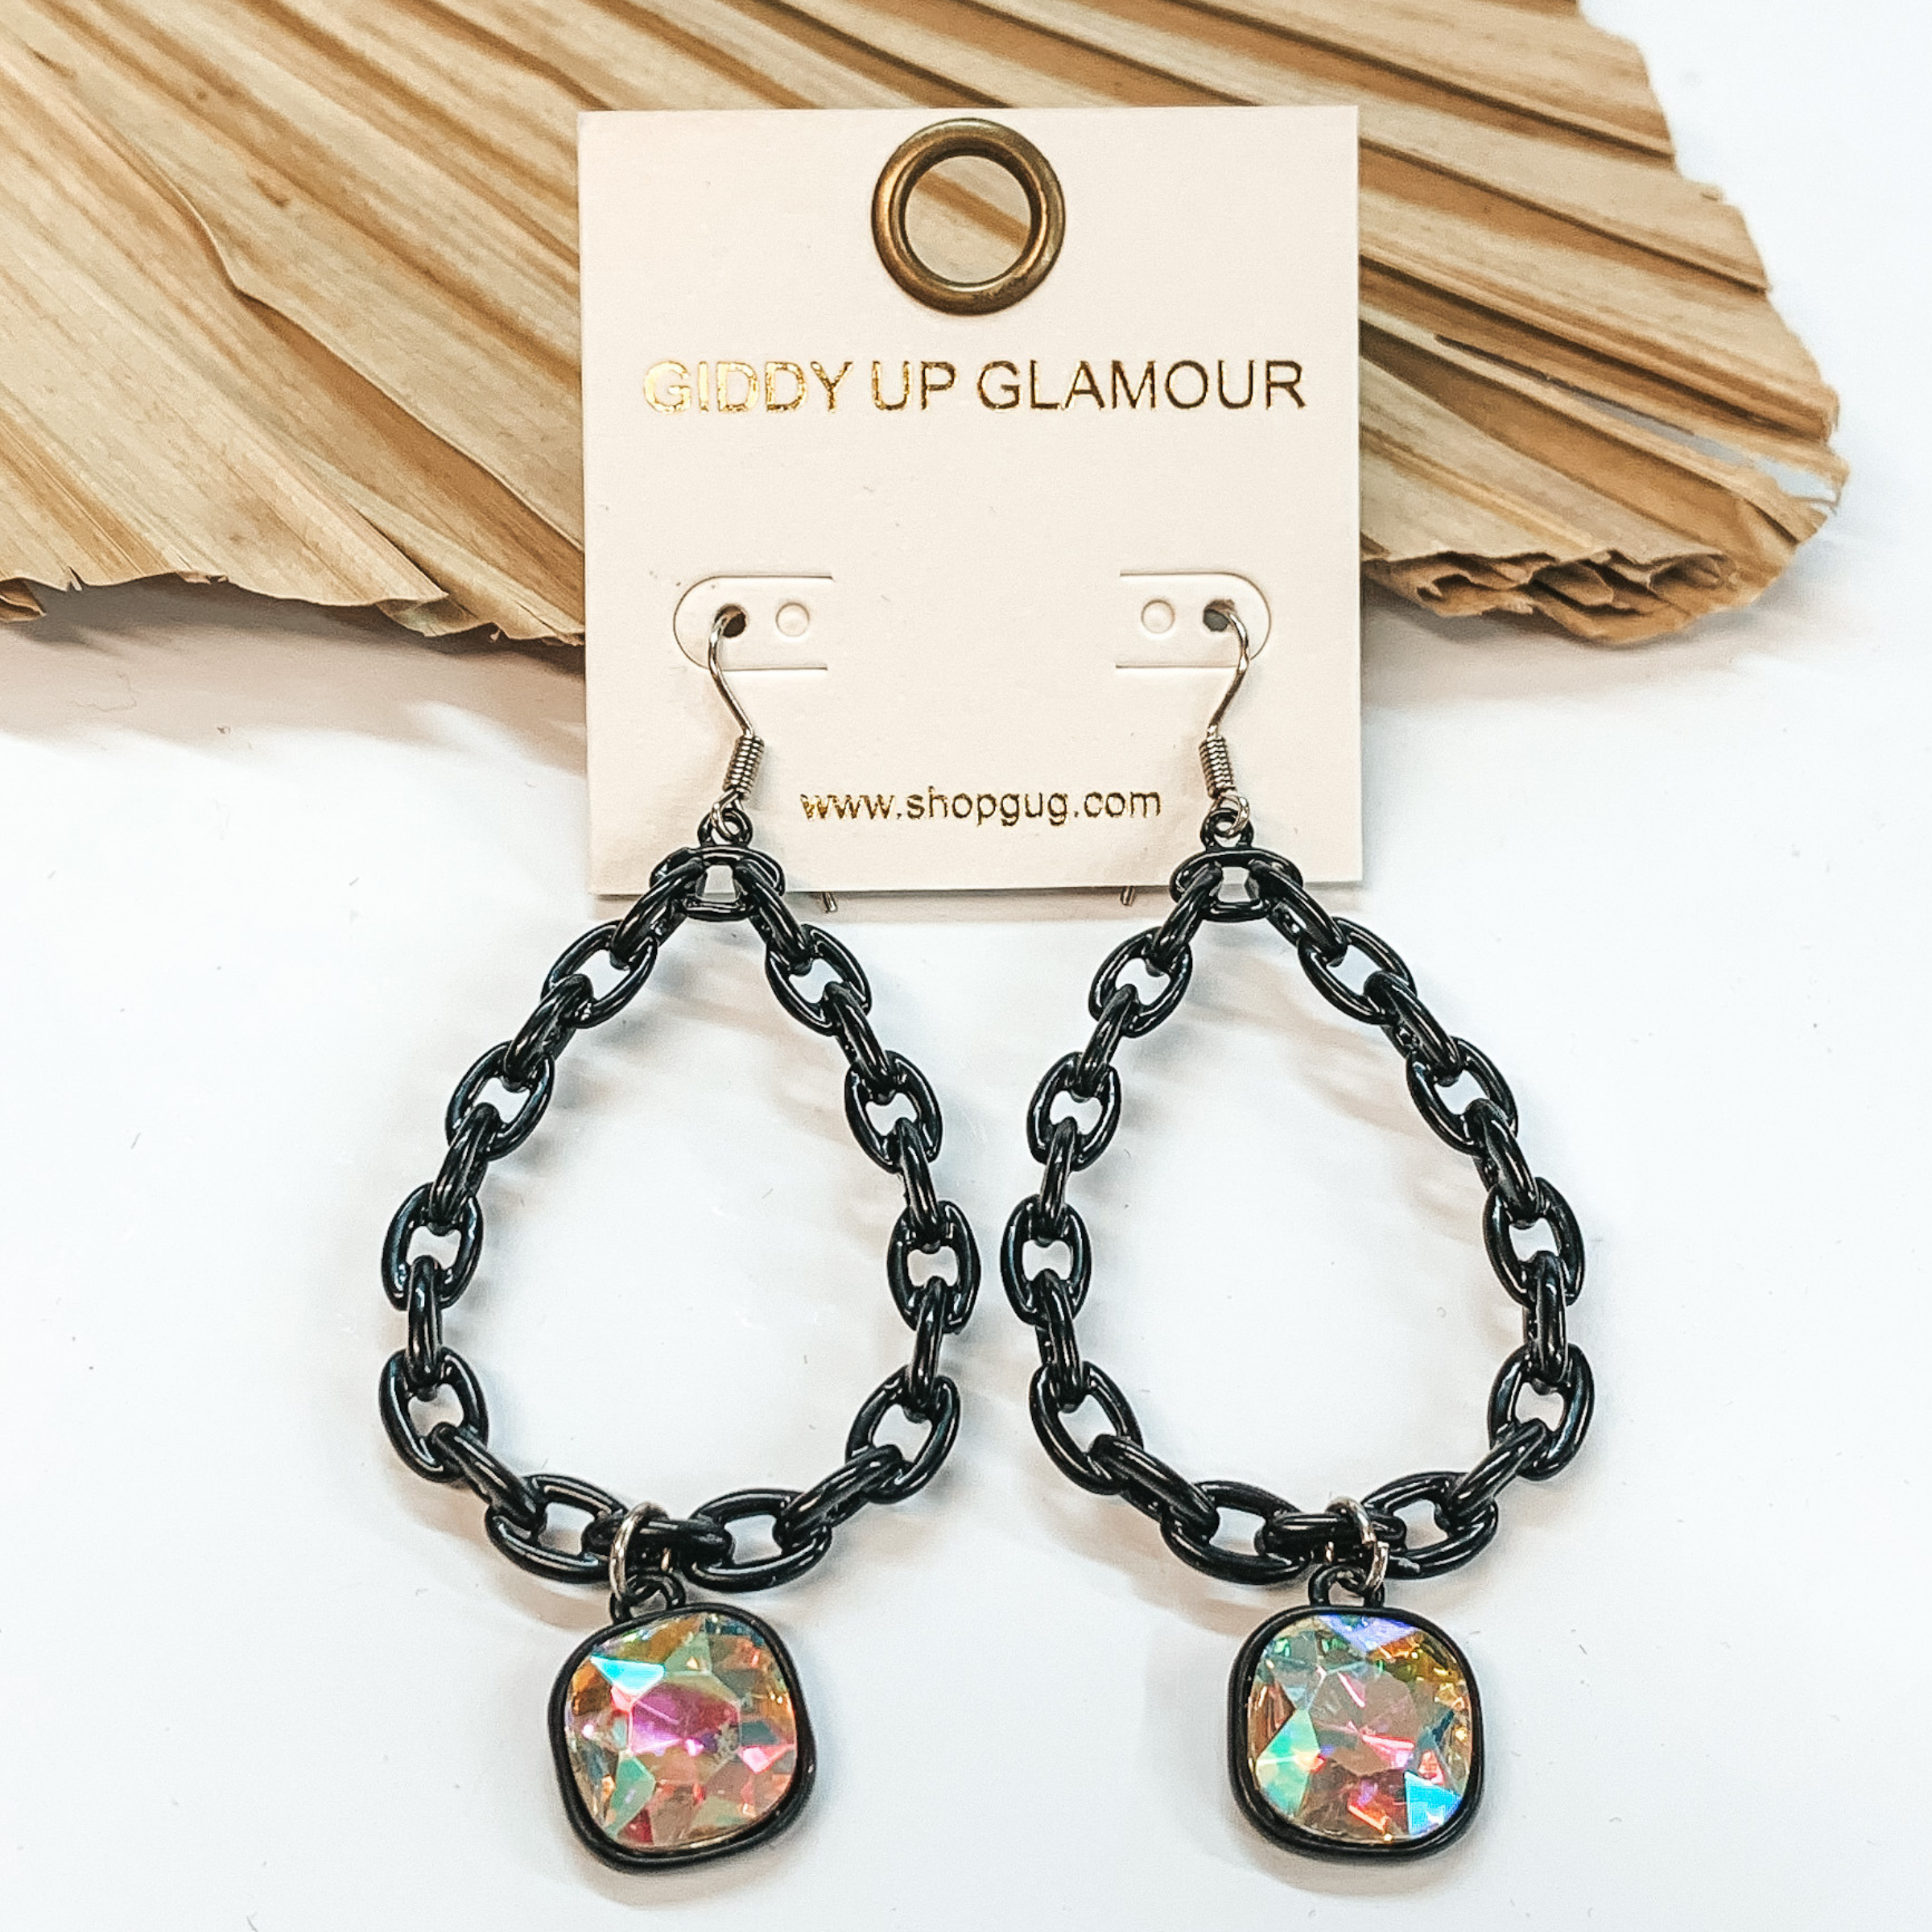 Black, chained, teardrop dangle earrings with a cushion cut drop AB crystal. These earrings are pictured on a white background with a brown leaf  in the back as decor.